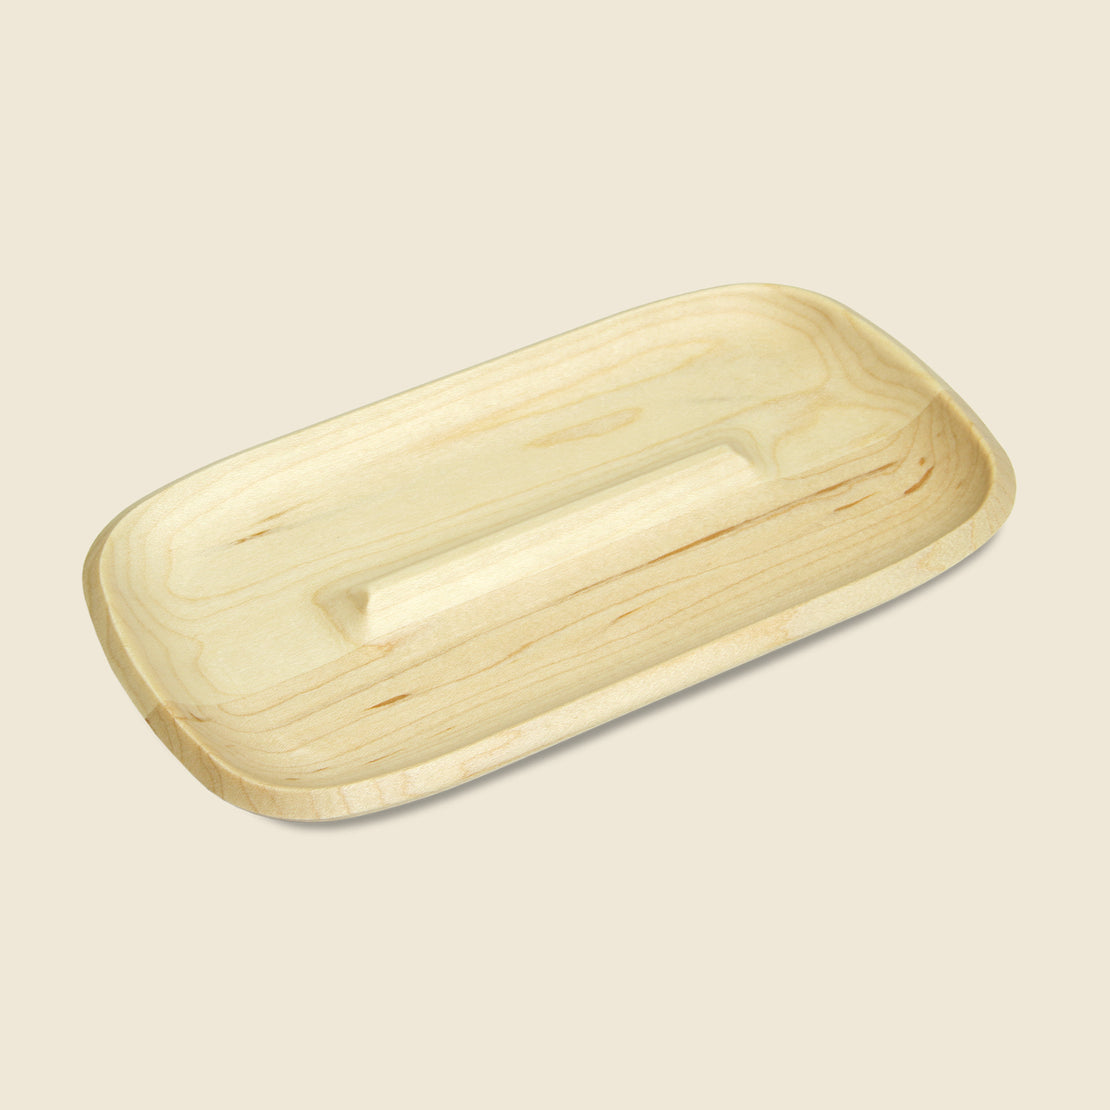 Craighill Small Catch Tray - Maple